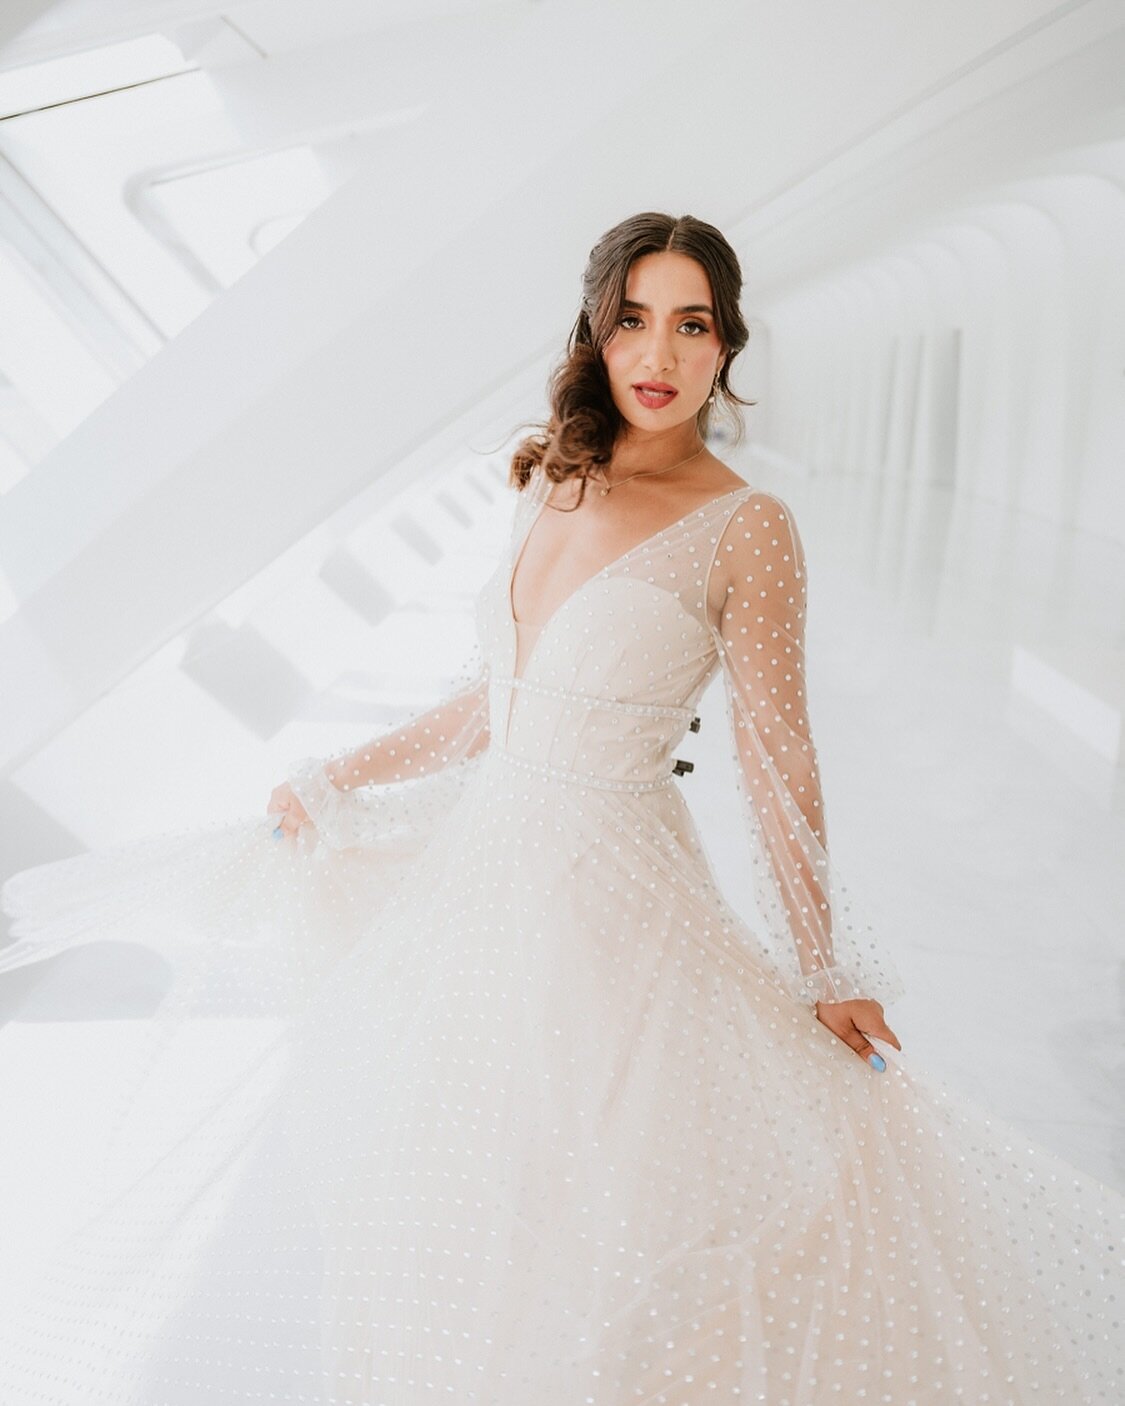 Gabriela. 

Shoot Team: 
Curated by @morrevents + @milwaukeeflowerco for @ourpetitemag 
Hair: @thomasdeanhairco
Makeup: @shalisaelizabeth_ // @brandywatkinsbeauty 
Gowns: @whitedressbridalboutique
Bespoke jewelry: @paloma_wilder
Suiting: @suitshopoff